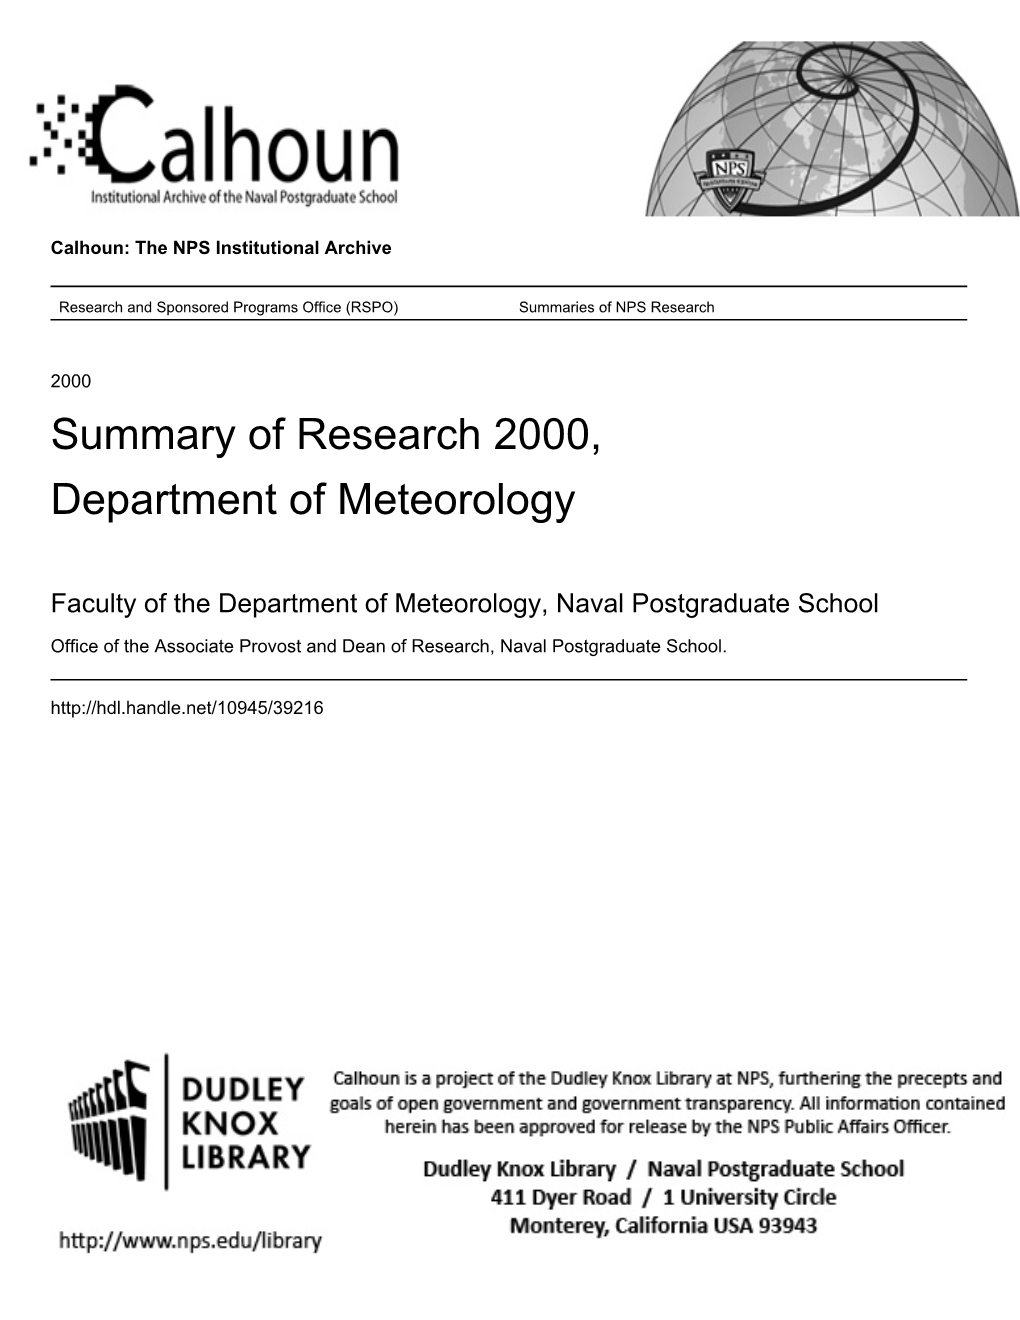 Summary of Research 2000, Department of Meteorology